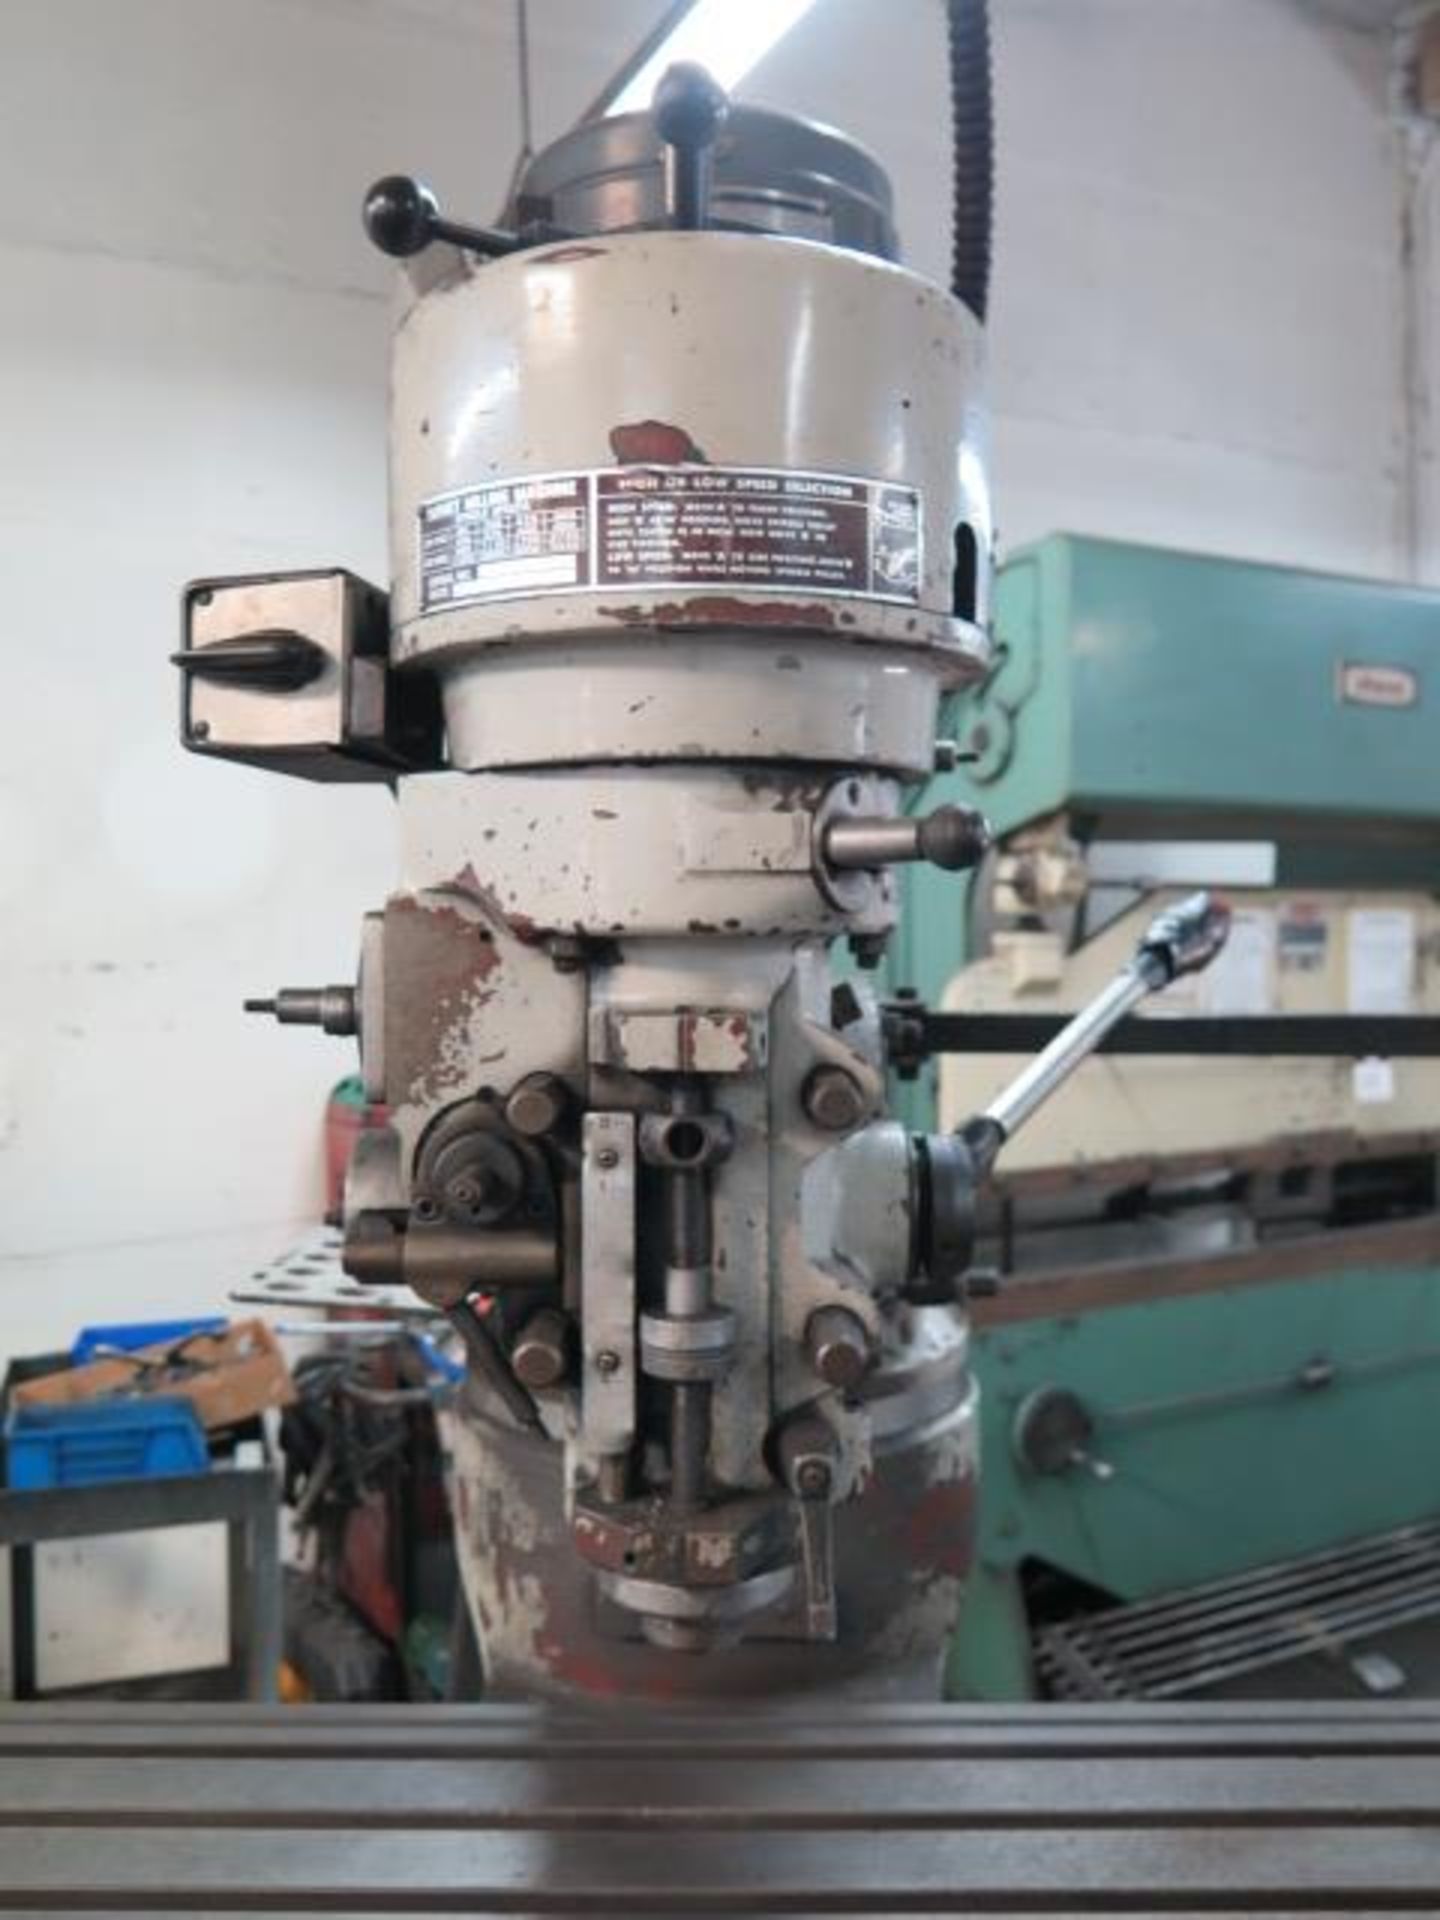 Acra AM-2S Vertical Mill s/n 96-1073-1 w/ 1Hp Motor, 80-5440 RPM, 16-Speeds, Power Feed, SOLD AS IS - Image 4 of 12